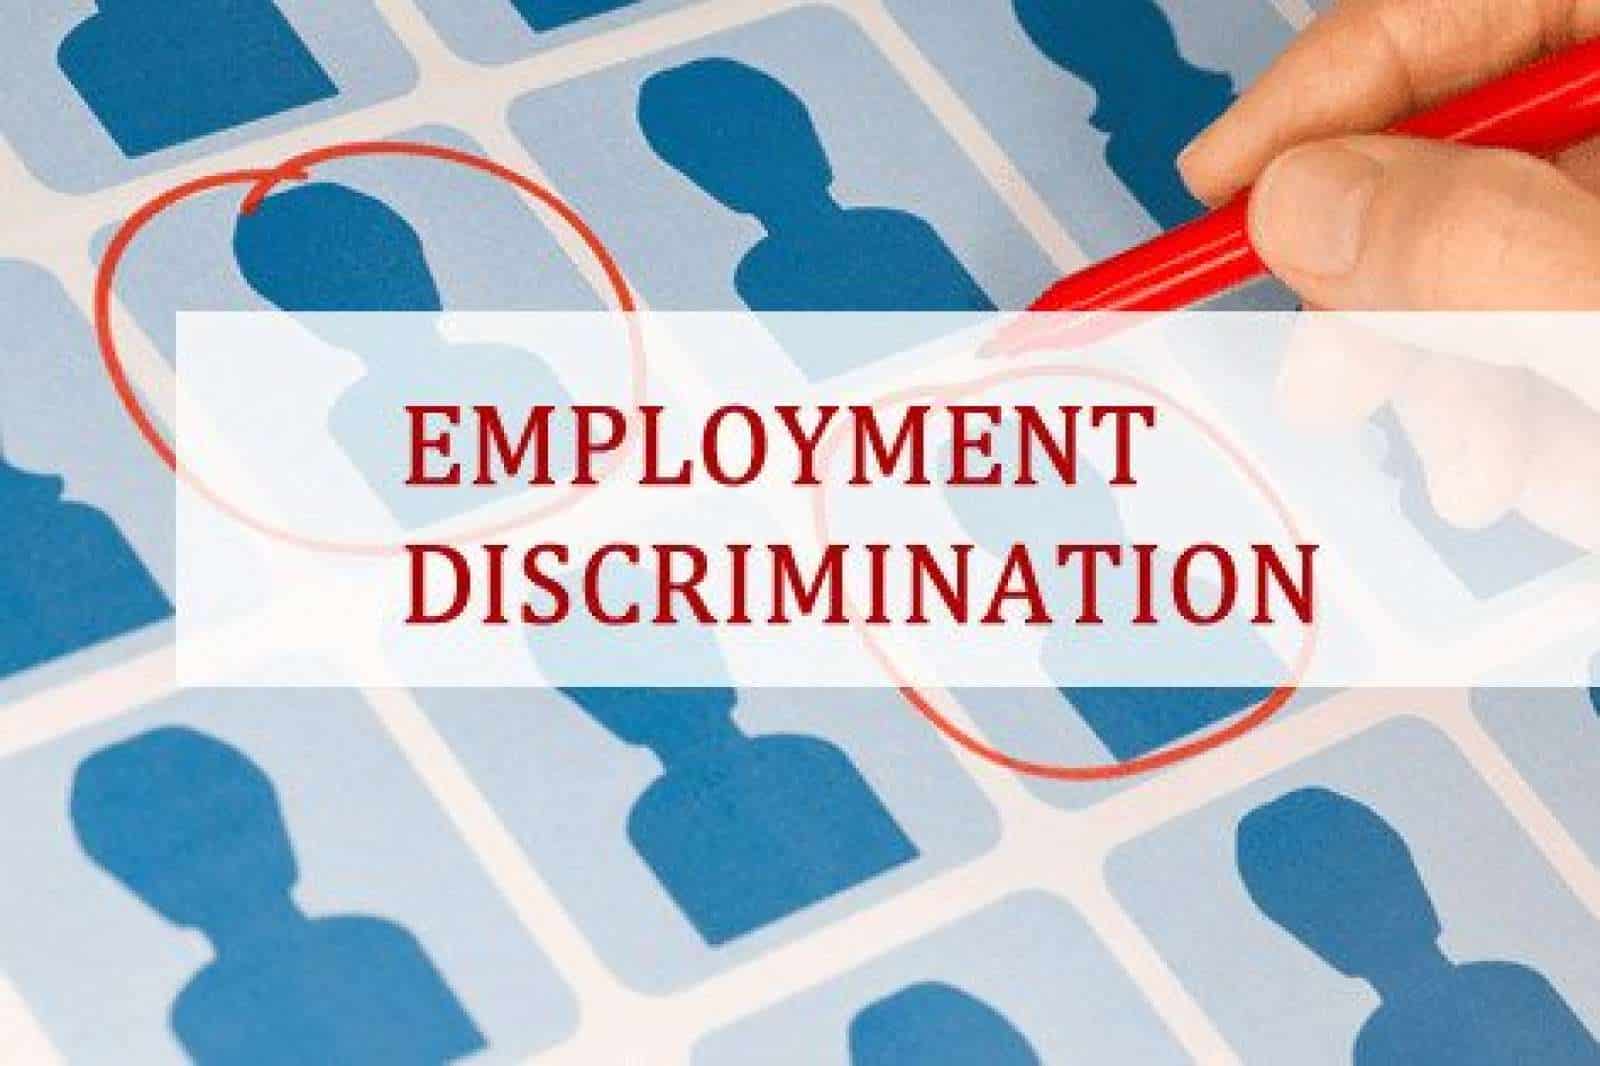 A Guide to Filing a Charge of Employment Discrimination